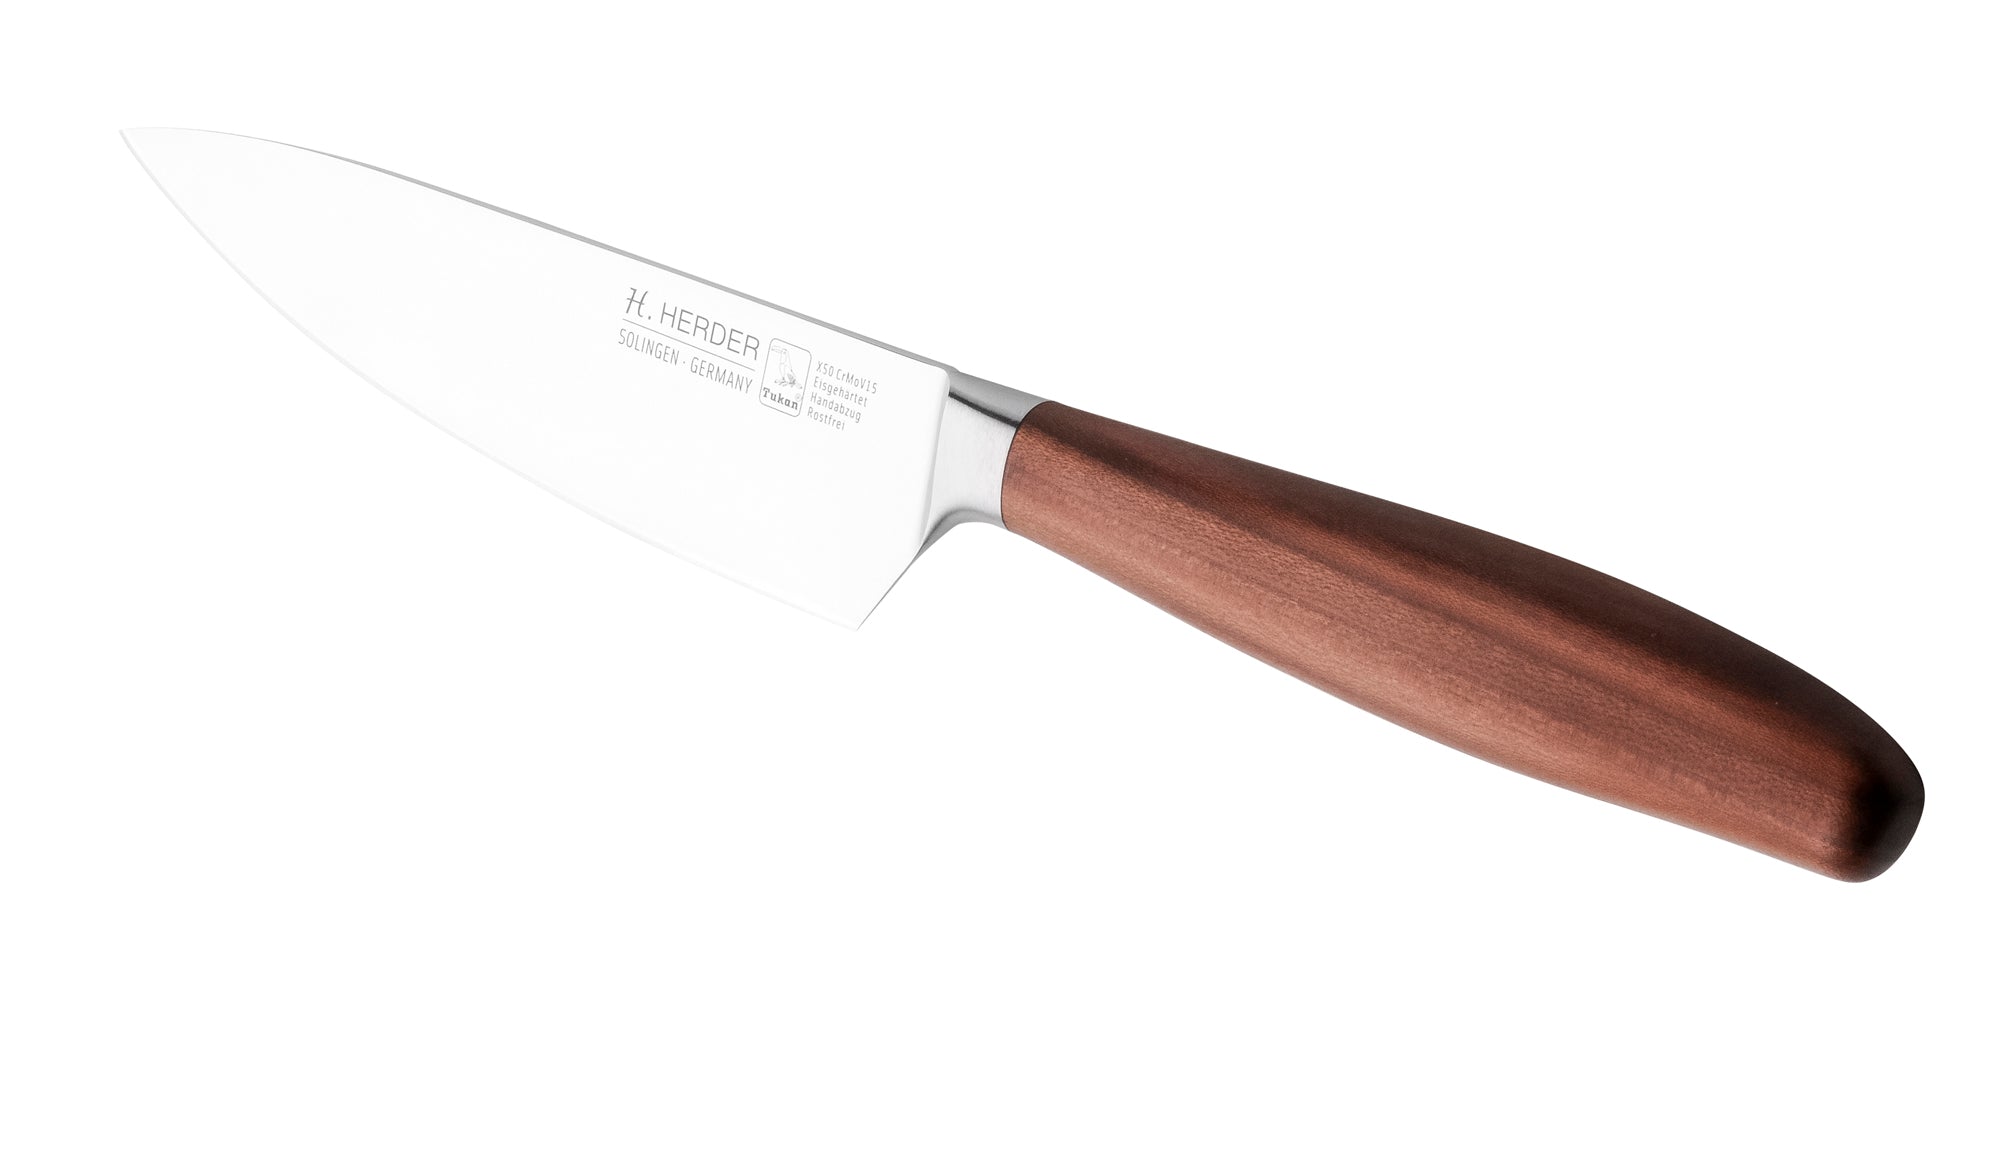 Chef's knife Eterno, plum wood, blade length 16cm, forged